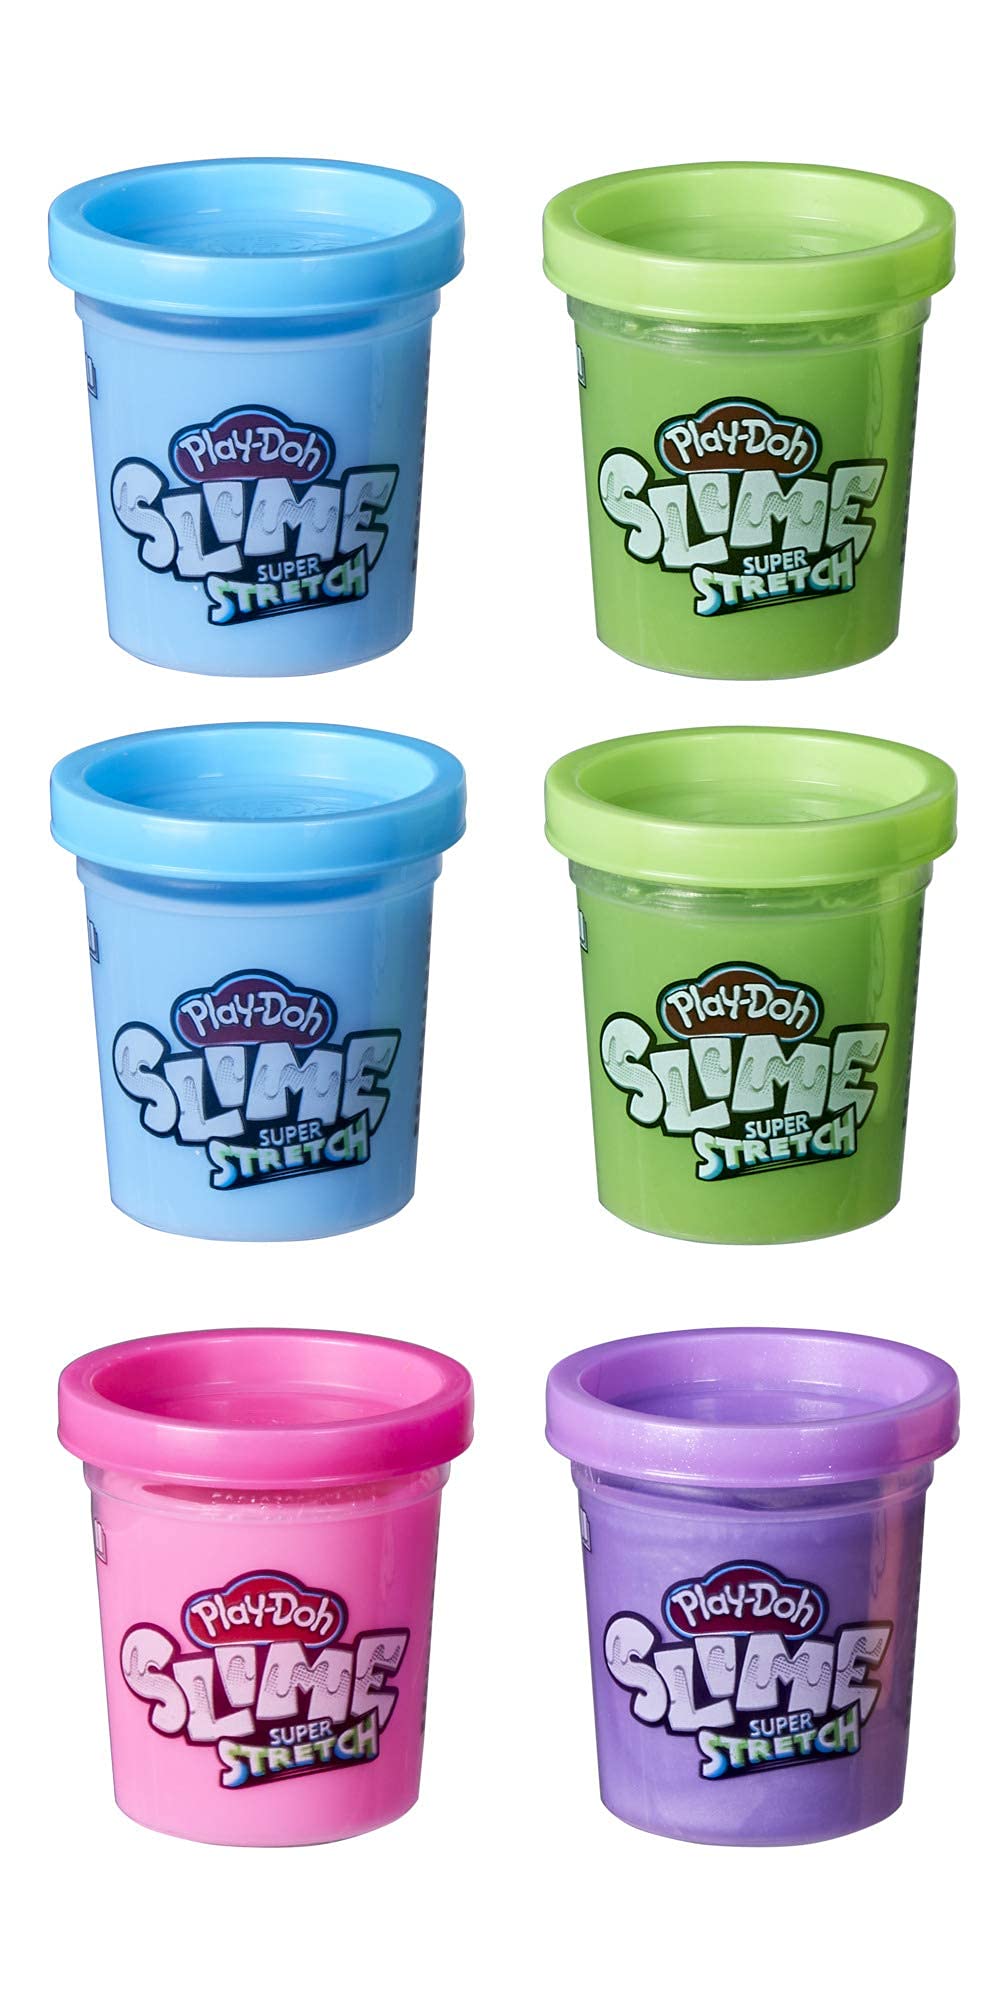 Play-Doh Slime Super Stretch Multipack of 12 for Kids 3 Years and Up, Premade, Assorted Colors Non-Toxic (Amazon Exclusive)